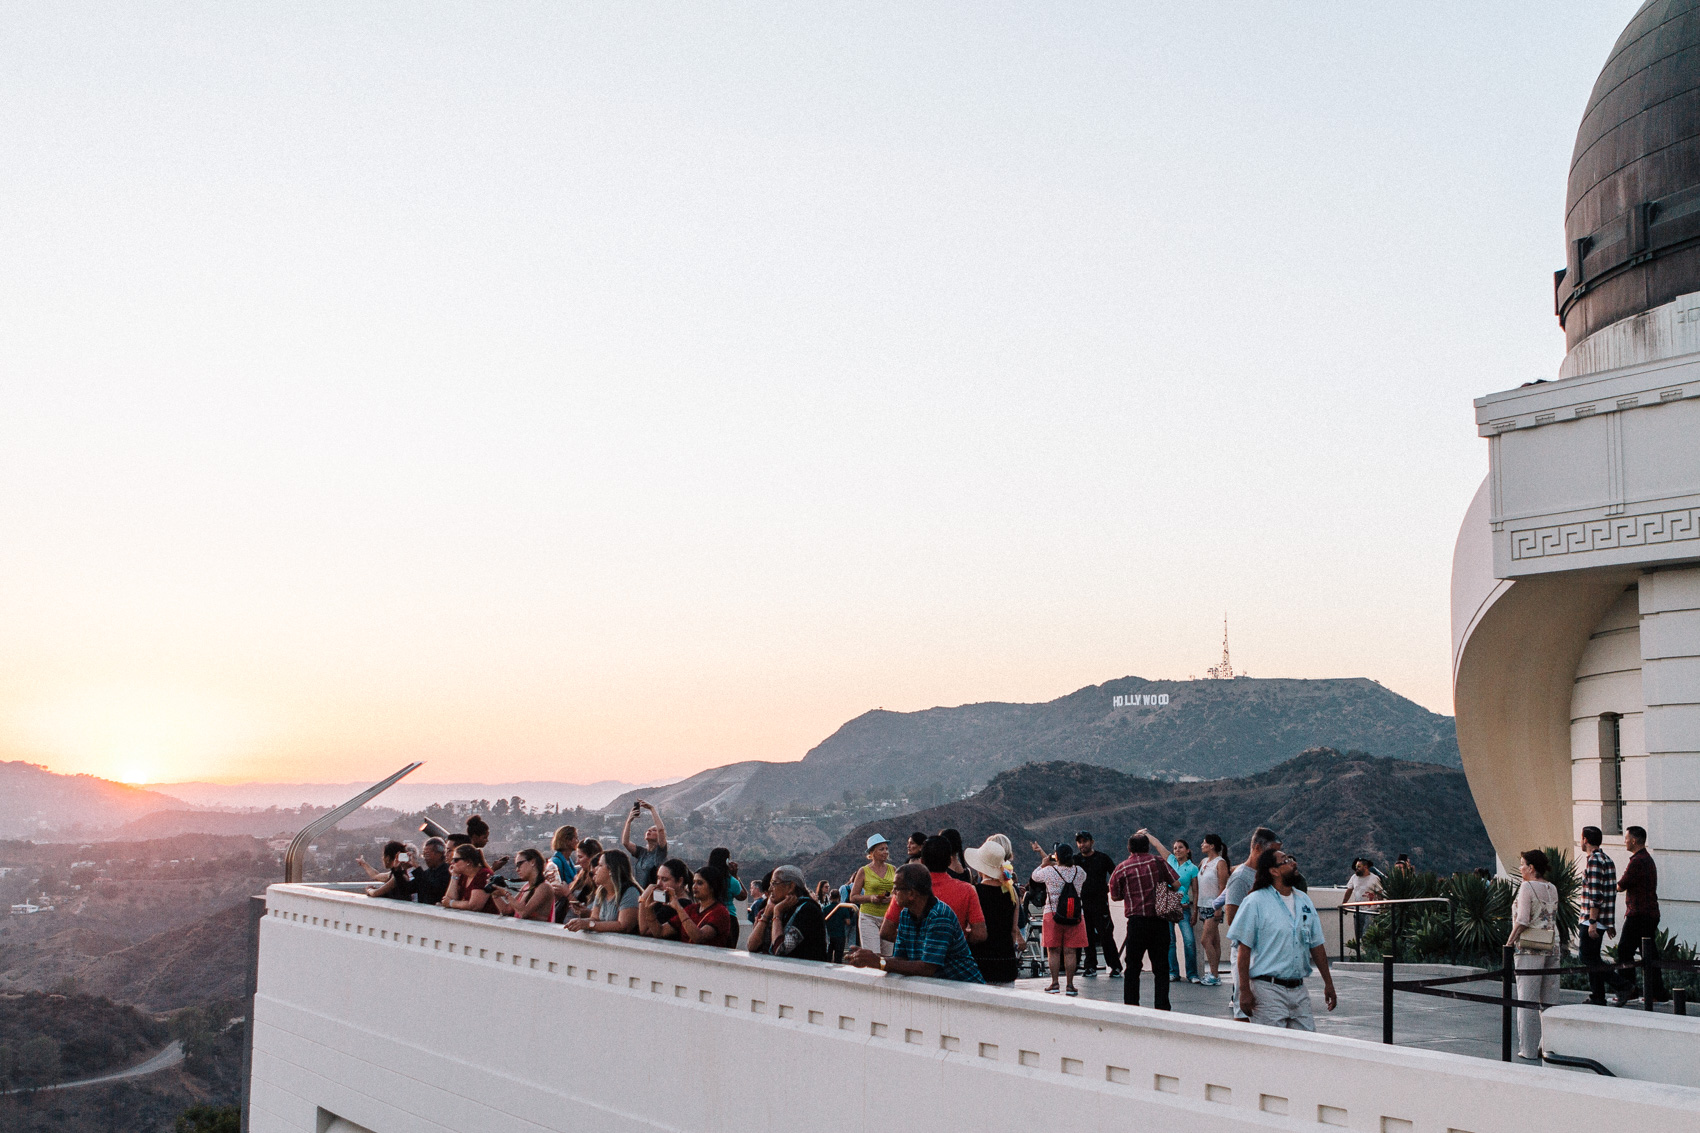 Visitors enjoying the sunset from the Griffith Observatory, against the Hollywood Hills and the Hollywood Sign